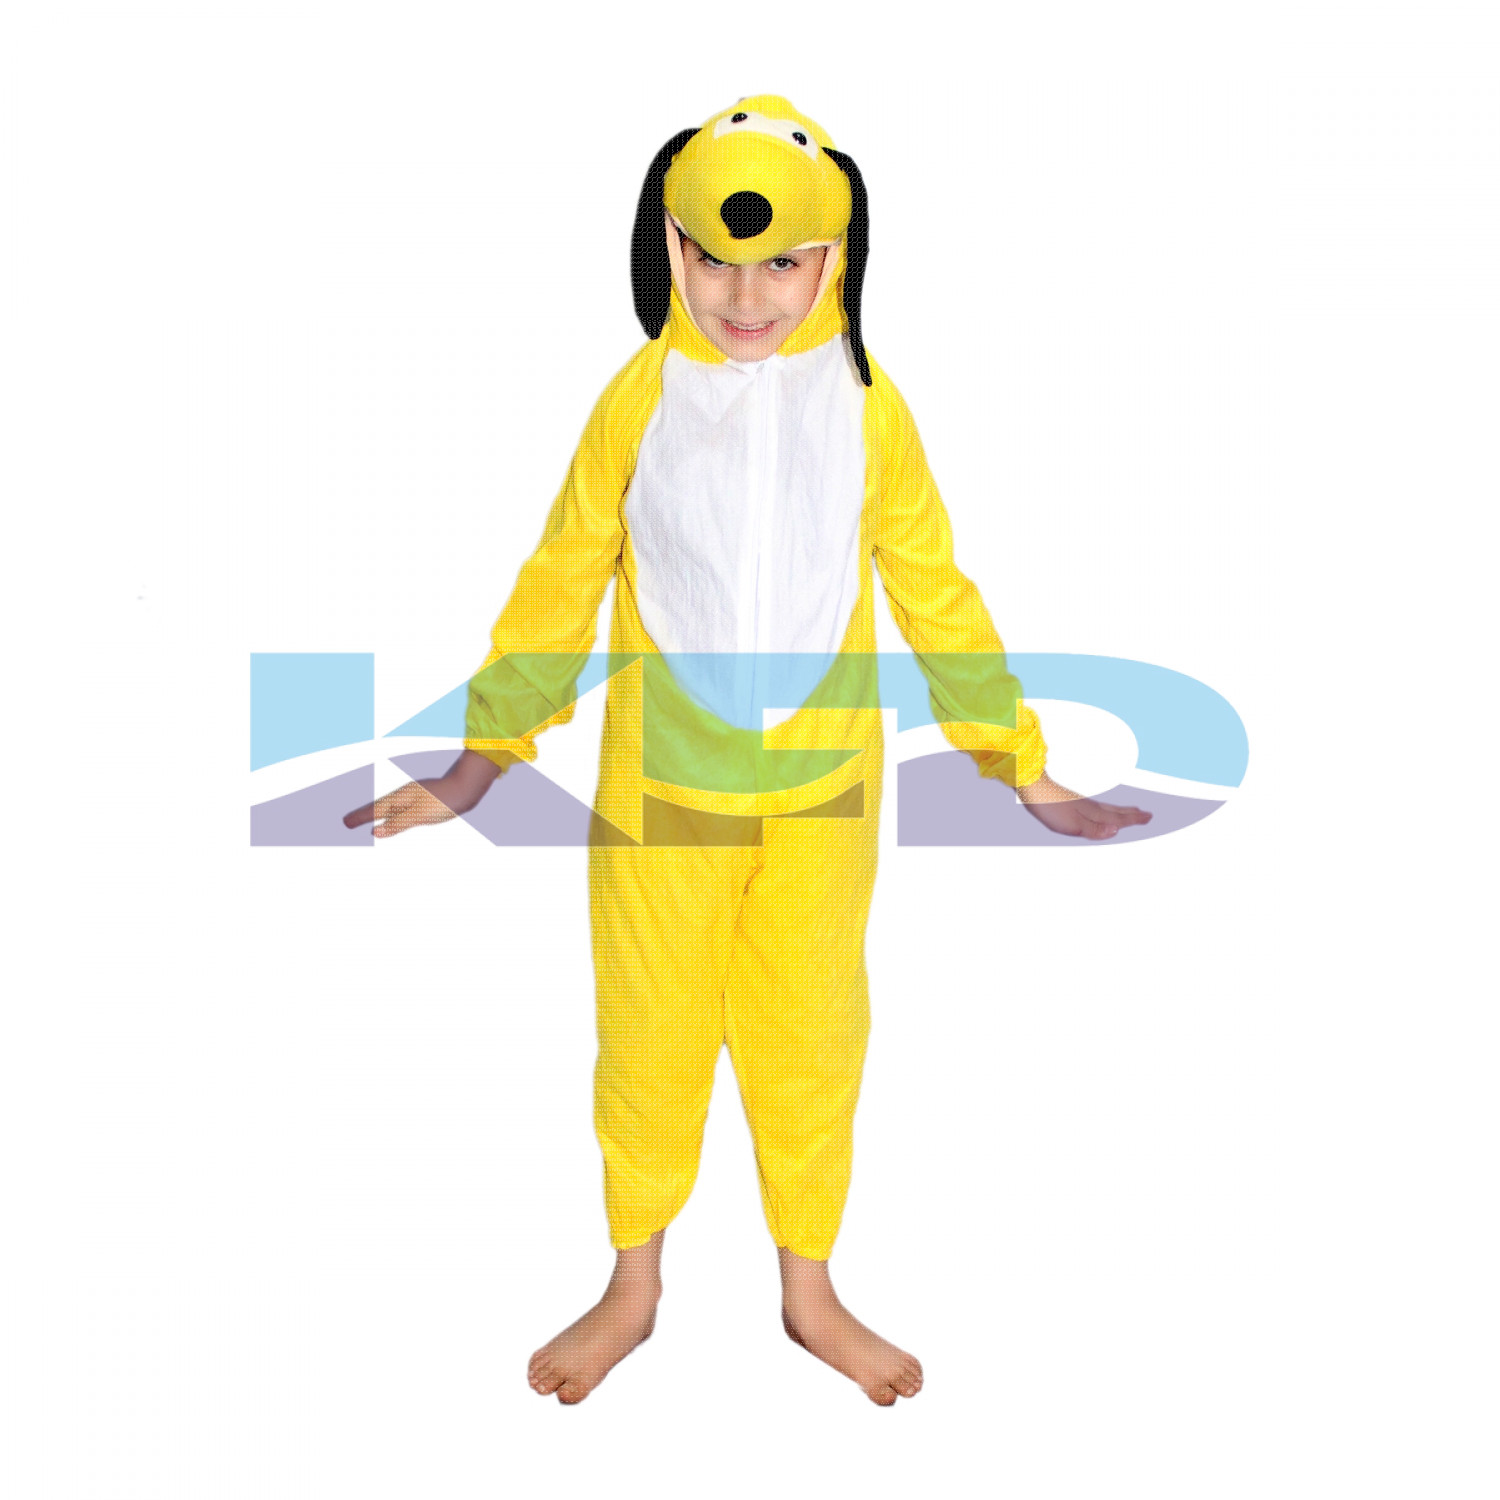 Pluto Dog Fancy dress for kids,Diseny Cartoon Costume for Annual function/Theme Party/Stage Shows/Competition/Birthday Party DressParty Dress